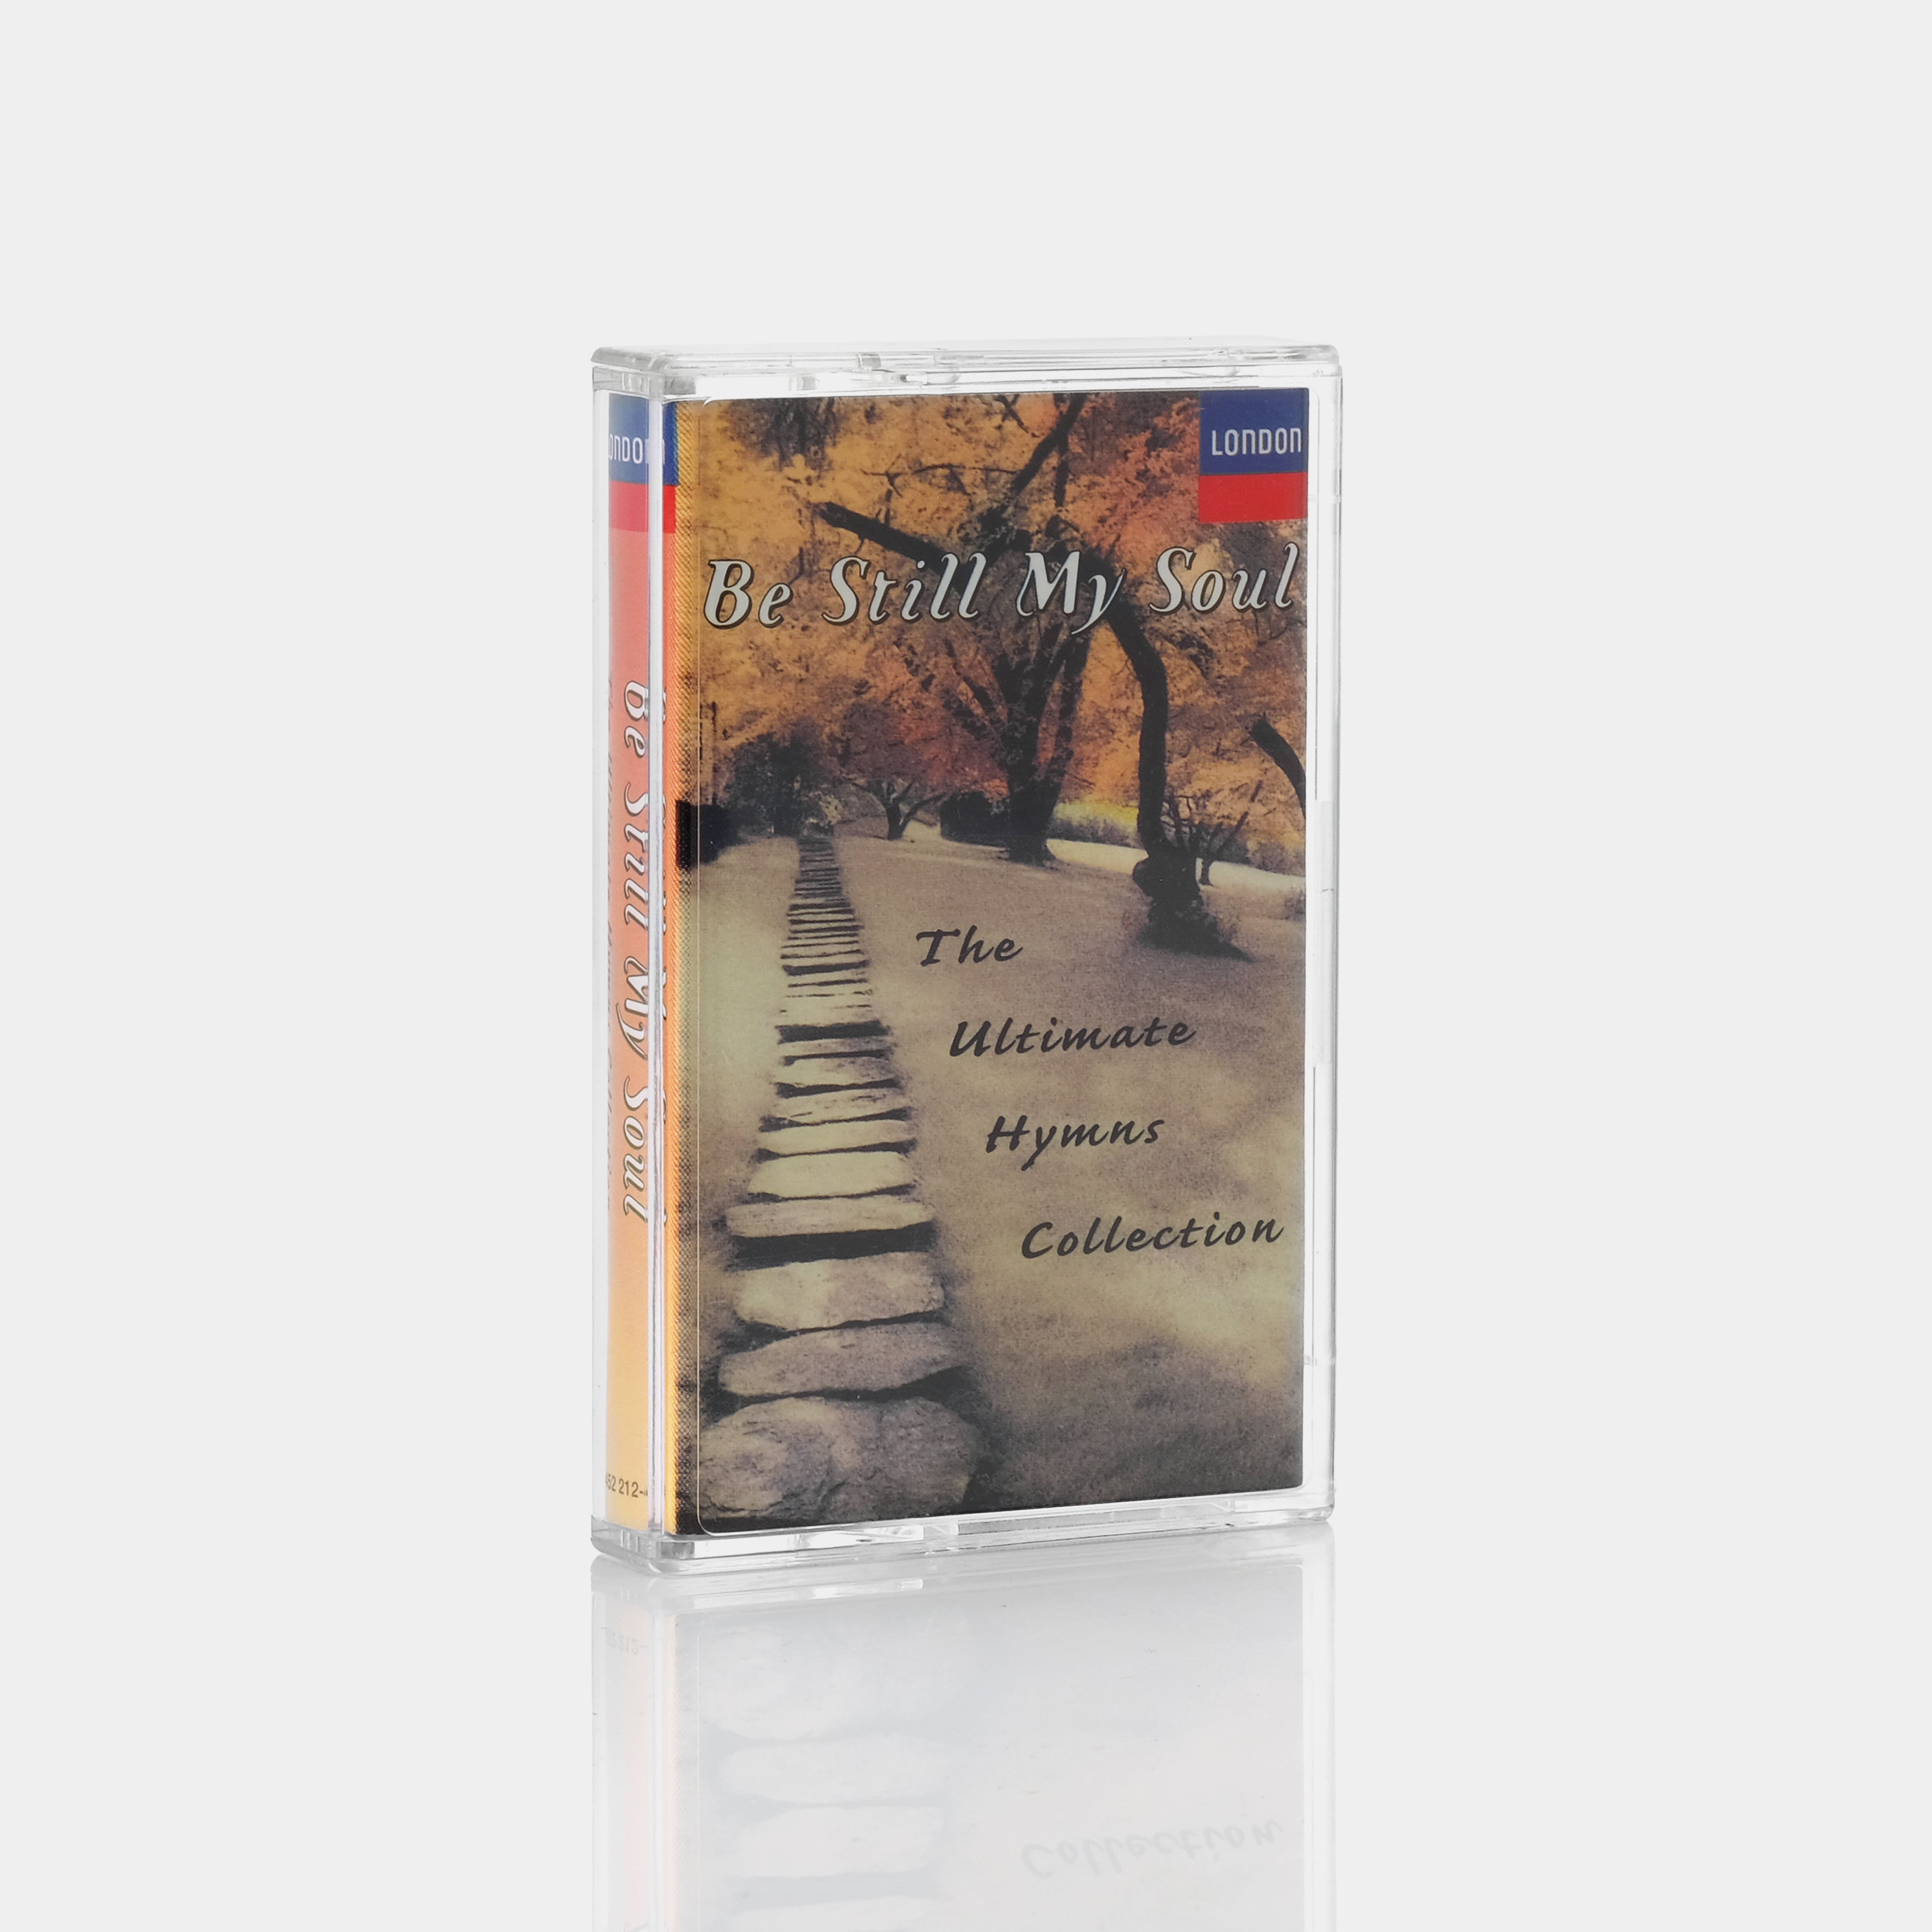 Be Still My Soul (The Ultimate Hymns Collection) Cassette Tape